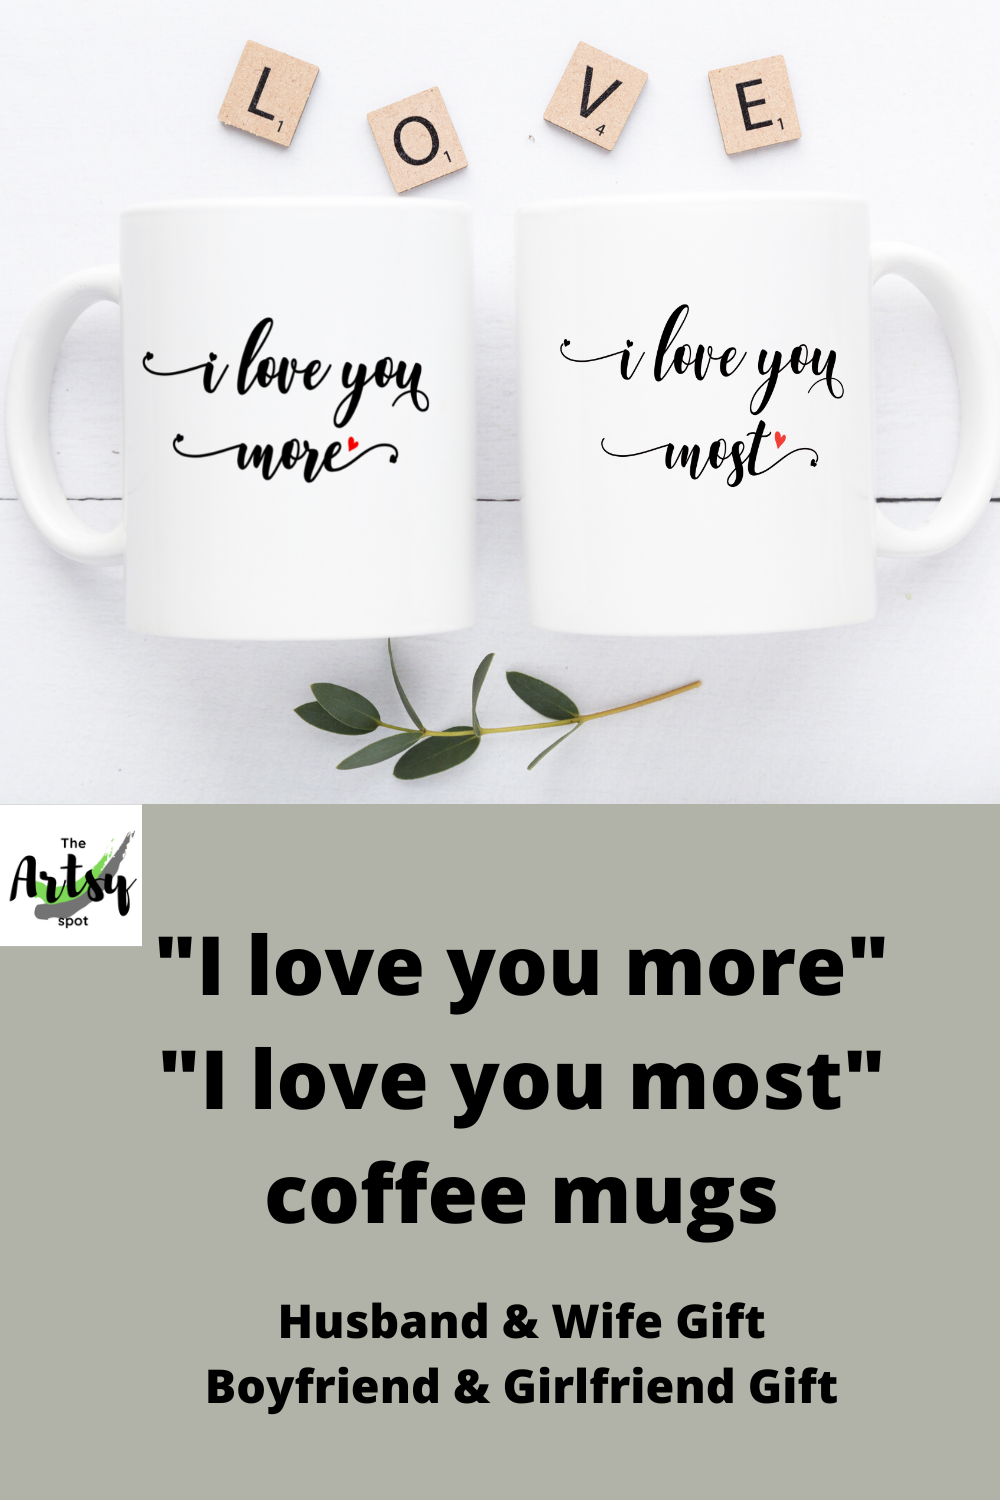 Buy Posh Present Multicolor Printed Valentine Mug Gift for Boyfriend  Girlfriend Husband Wife Ceramic Coffee Mug Printed Mugs Ideal Gift for Men  Girls Boys Fiance Couples Friends,Gifts. Online at Low Prices in